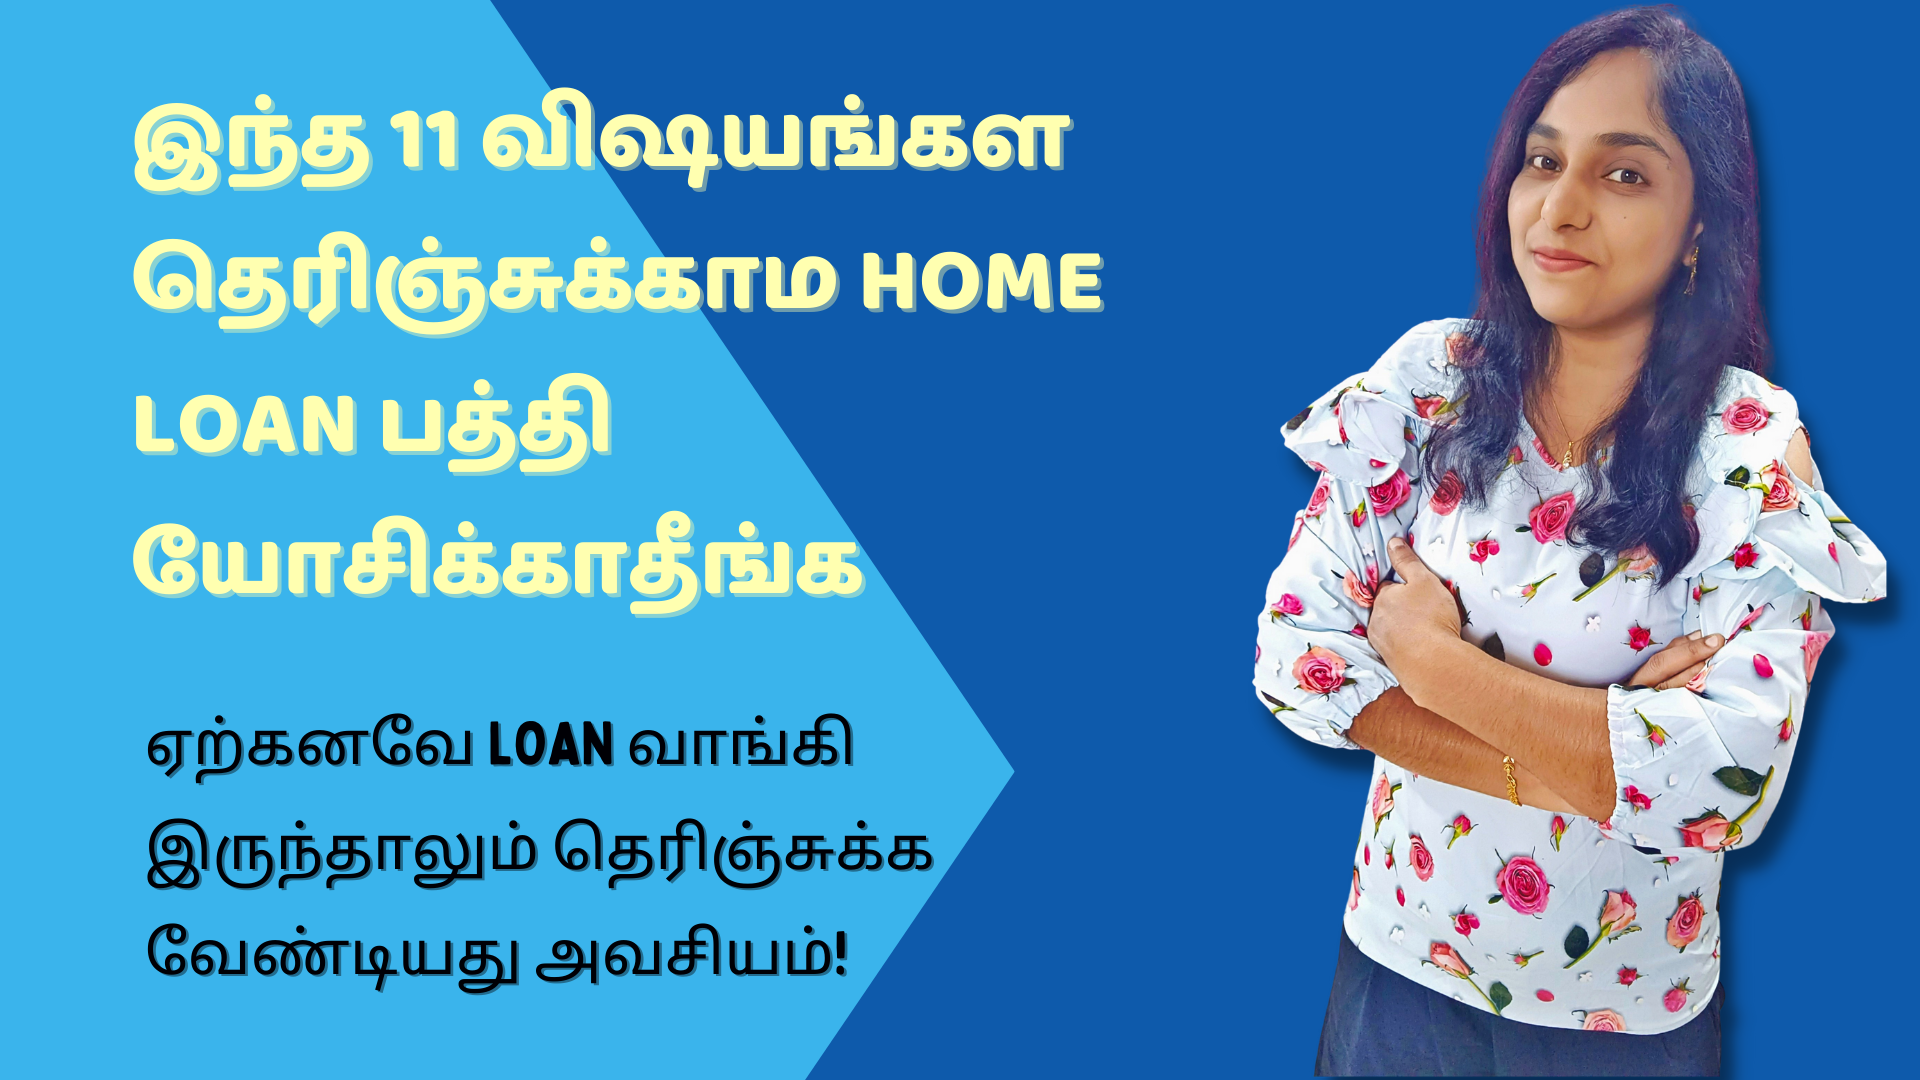 Factors To Consider Before Taking A Home Loan